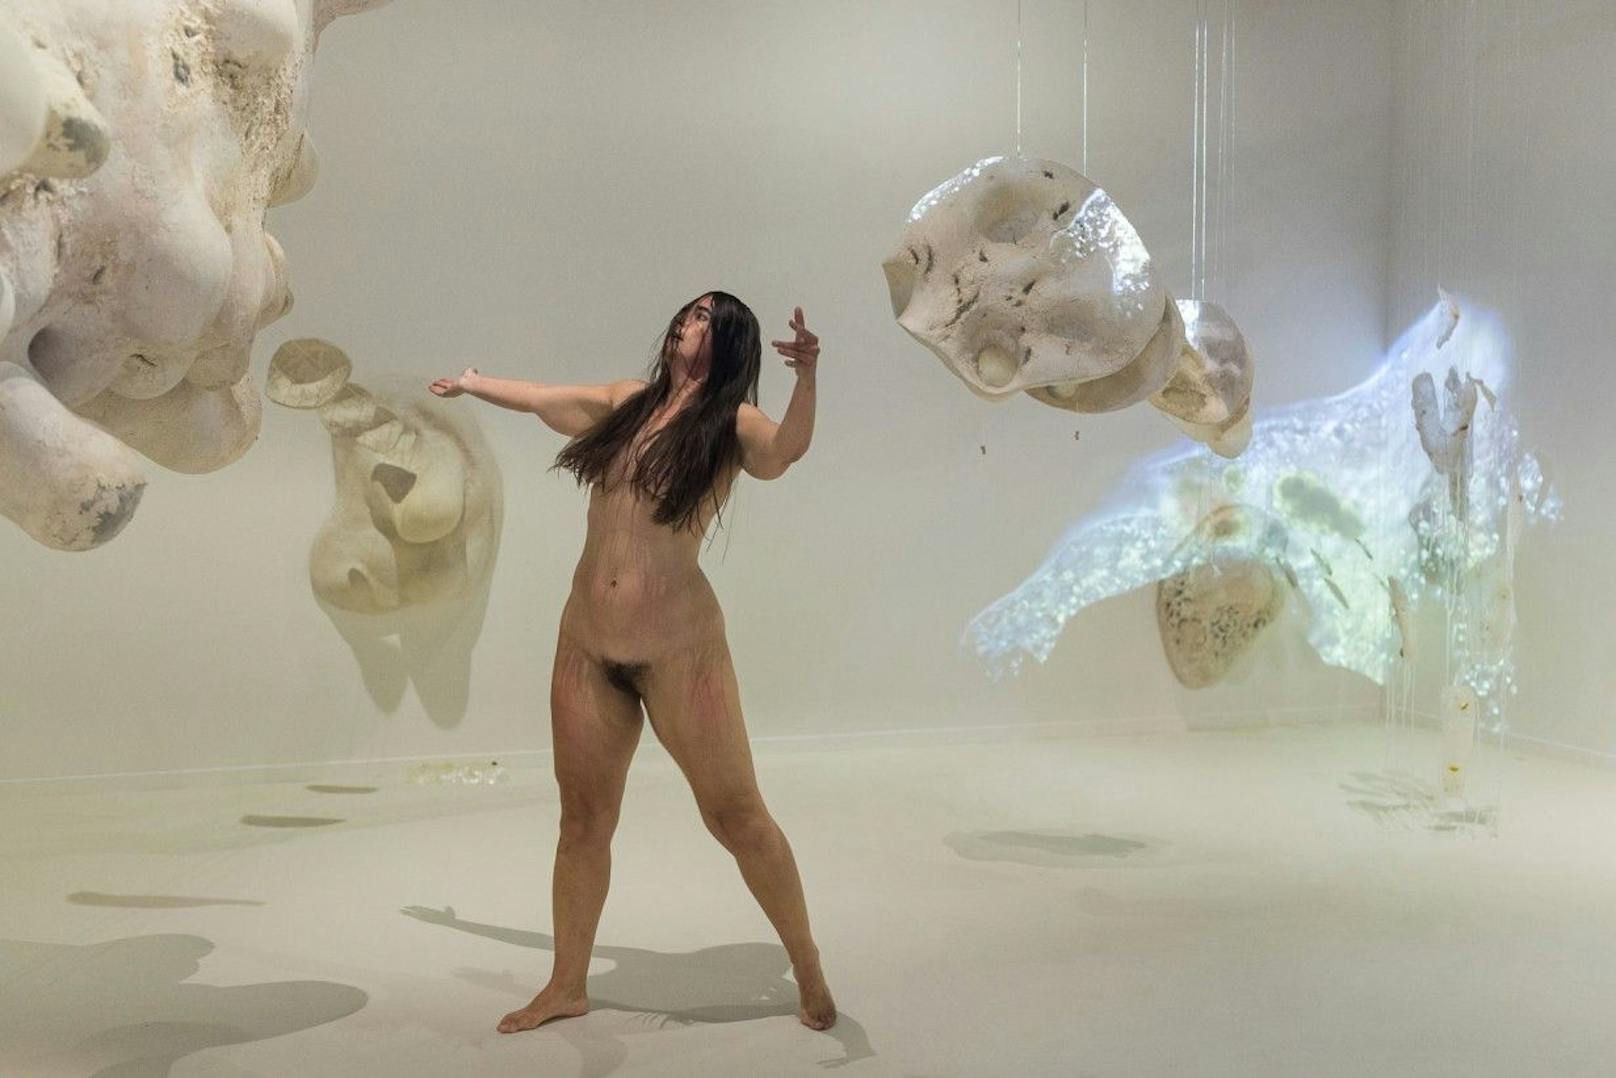 "Entangled Relations – Animated Bodies"